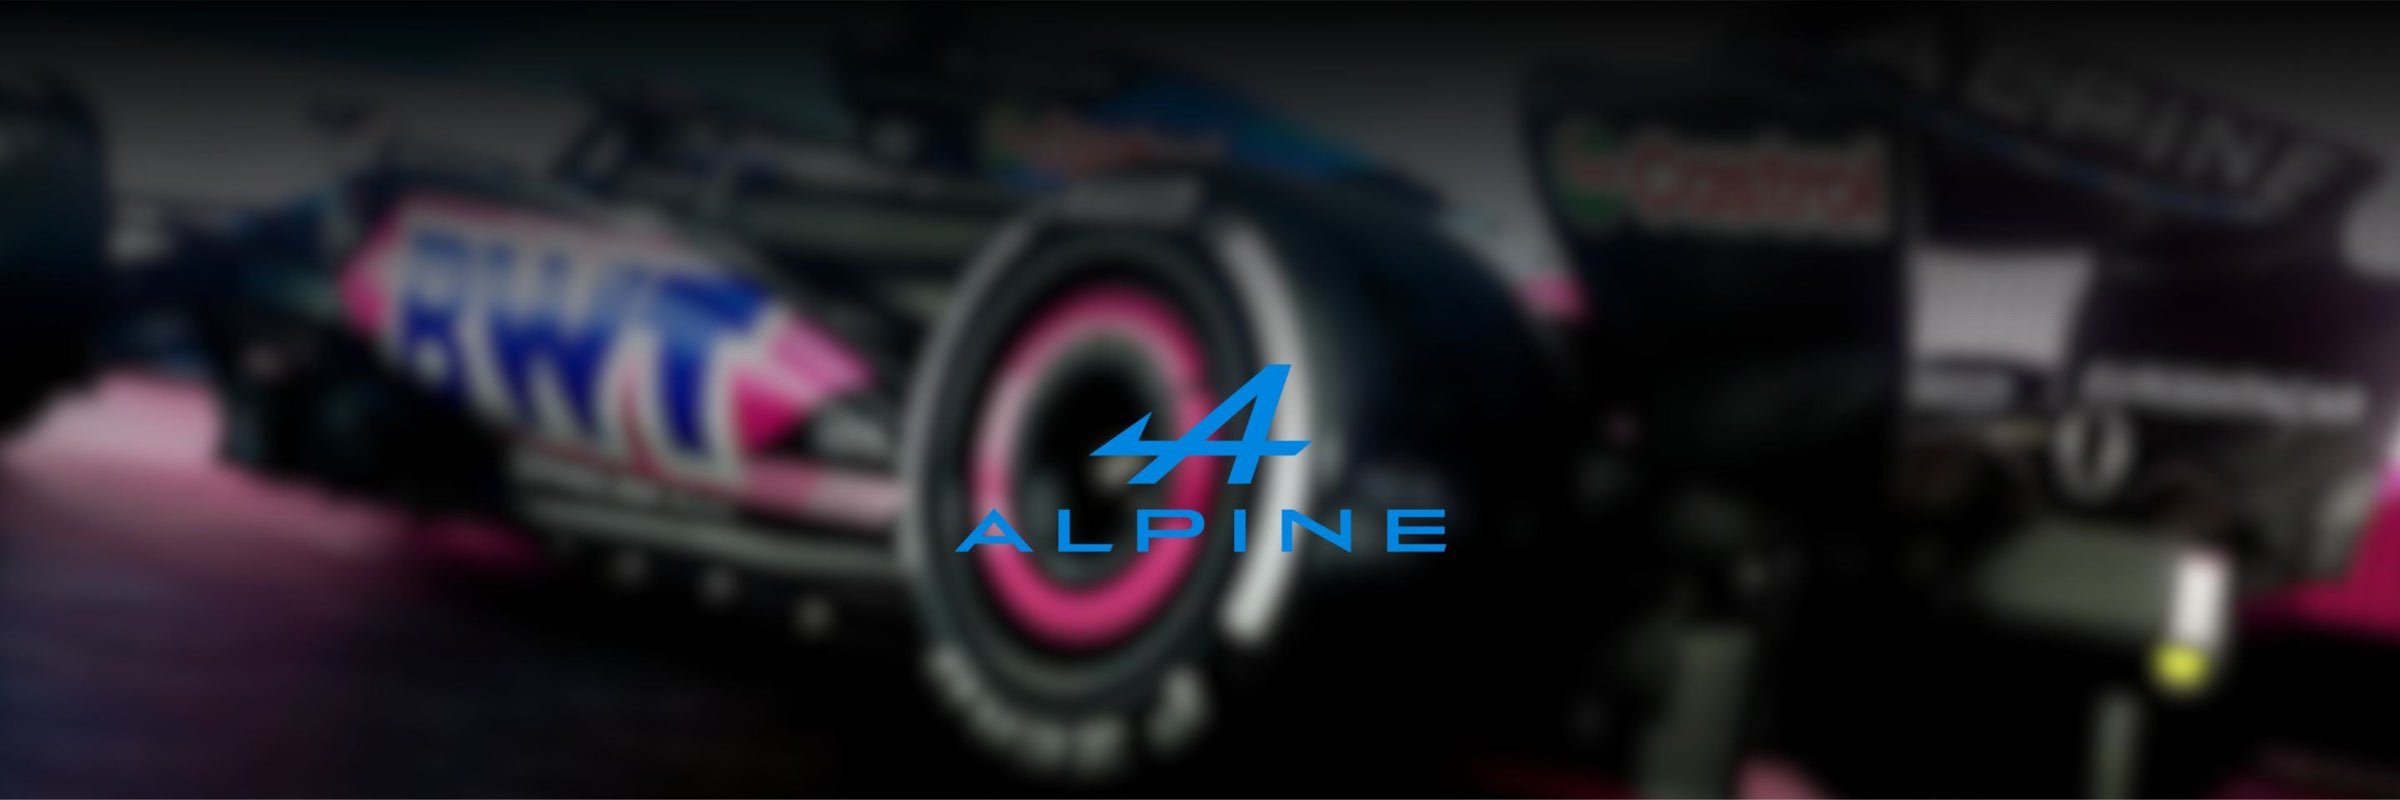 Alpine F1 - F1 and Motorpsort Offficial Merchandise - Fueler store